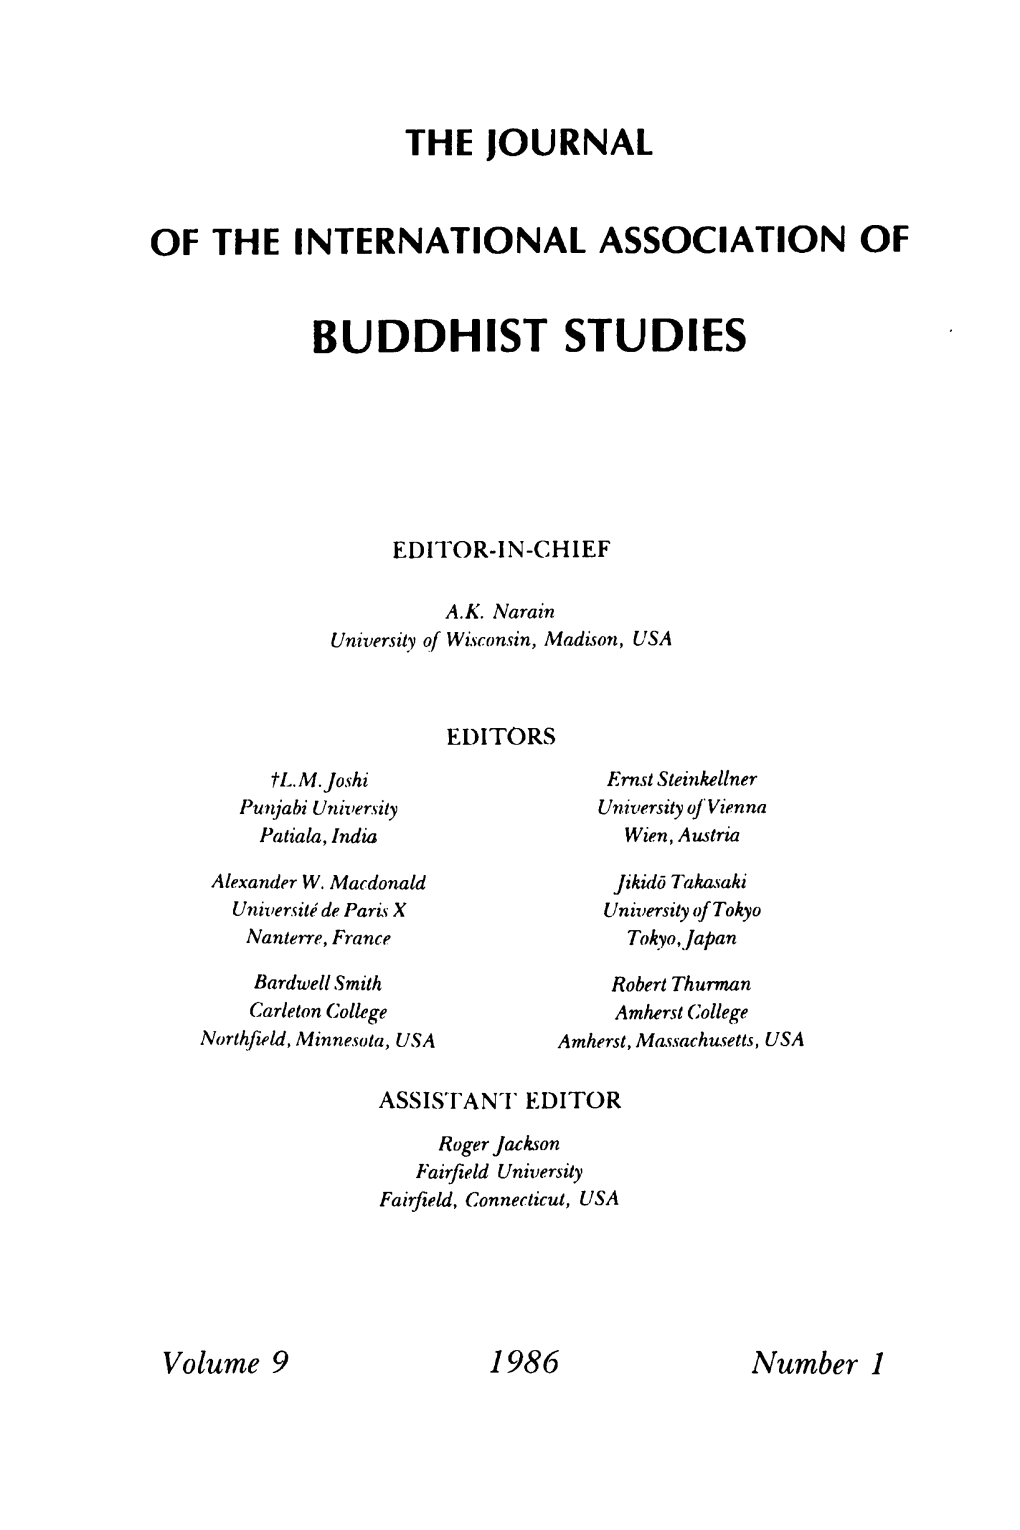 Buddhism and the Caste System, by Y